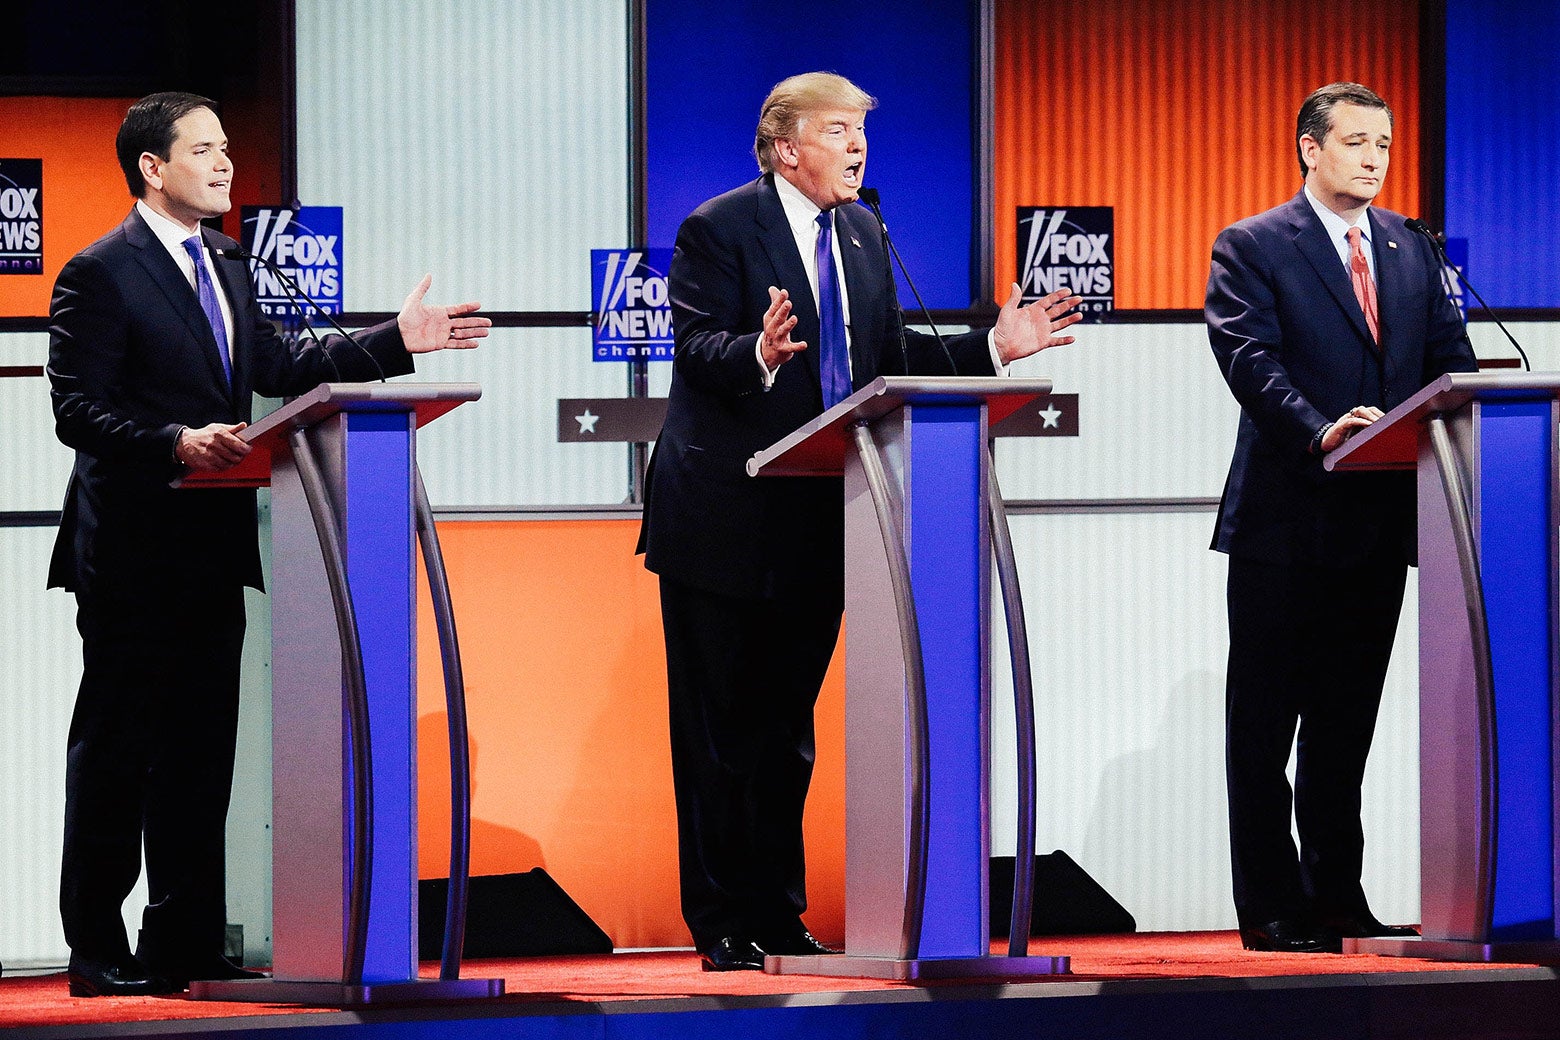 Marco Rubio, Donald Trump, and Ted Cruz participate in a debate sponsored by Fox News at the Fox Theatre on March 3, 2016, in Detroit.